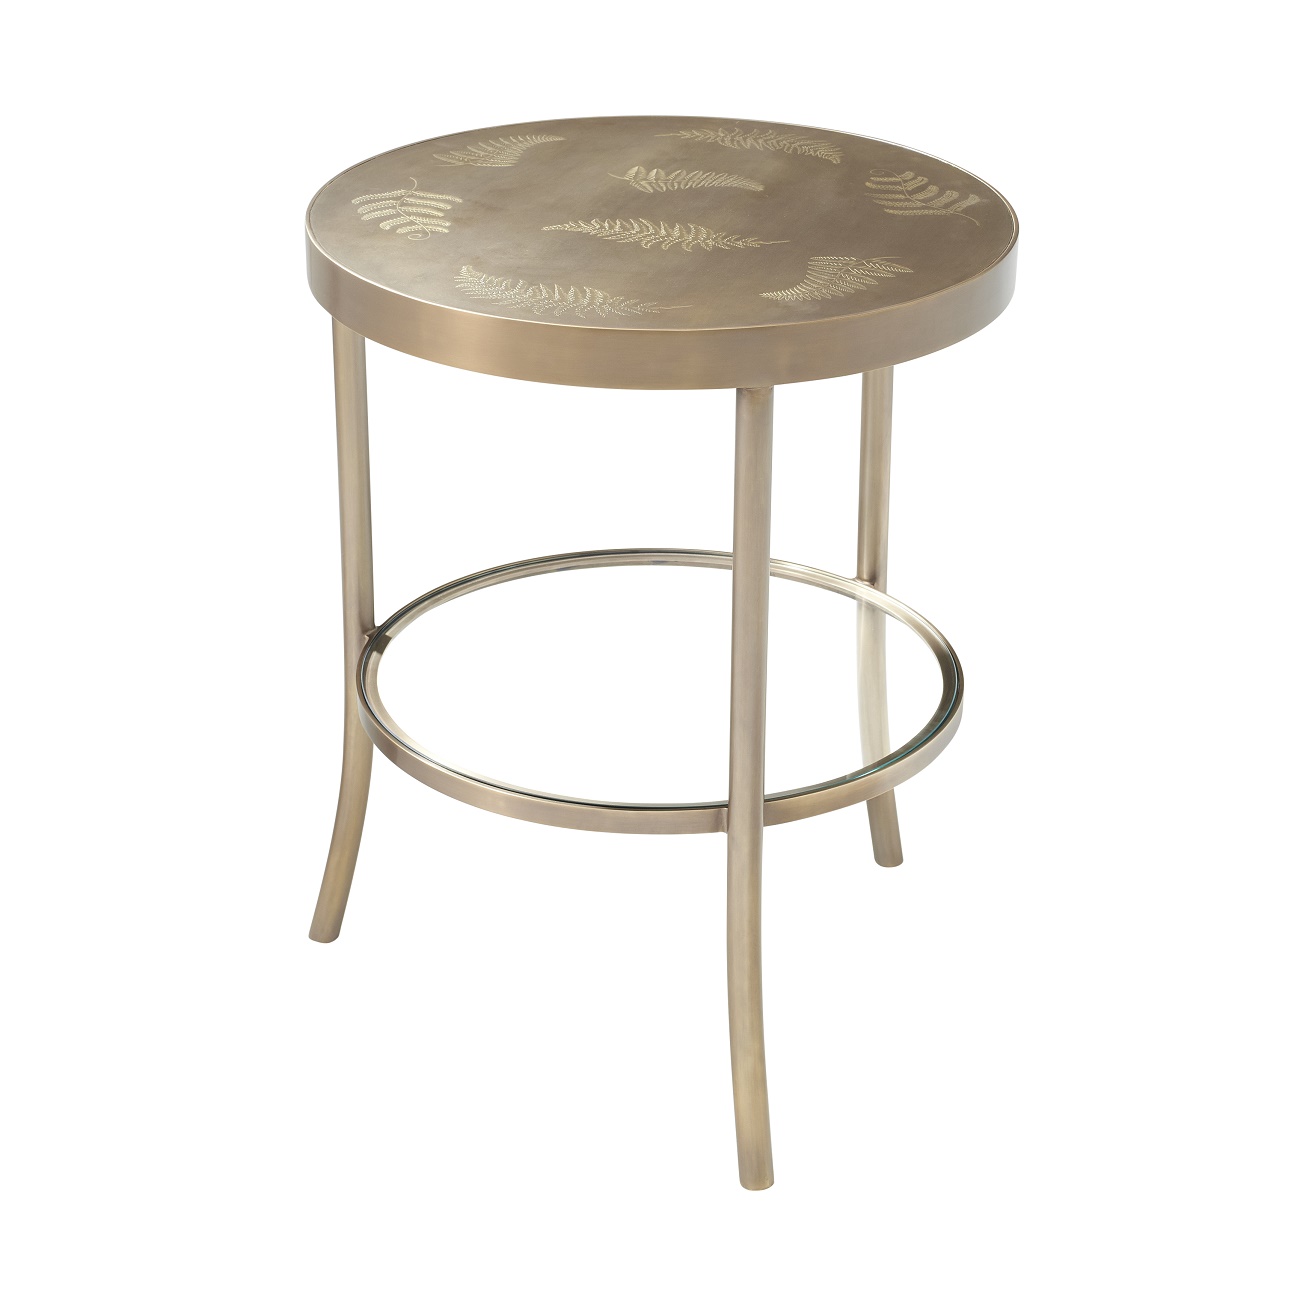 Theodore Alexander, Accent Lamp Table, Brooklyn, New York 